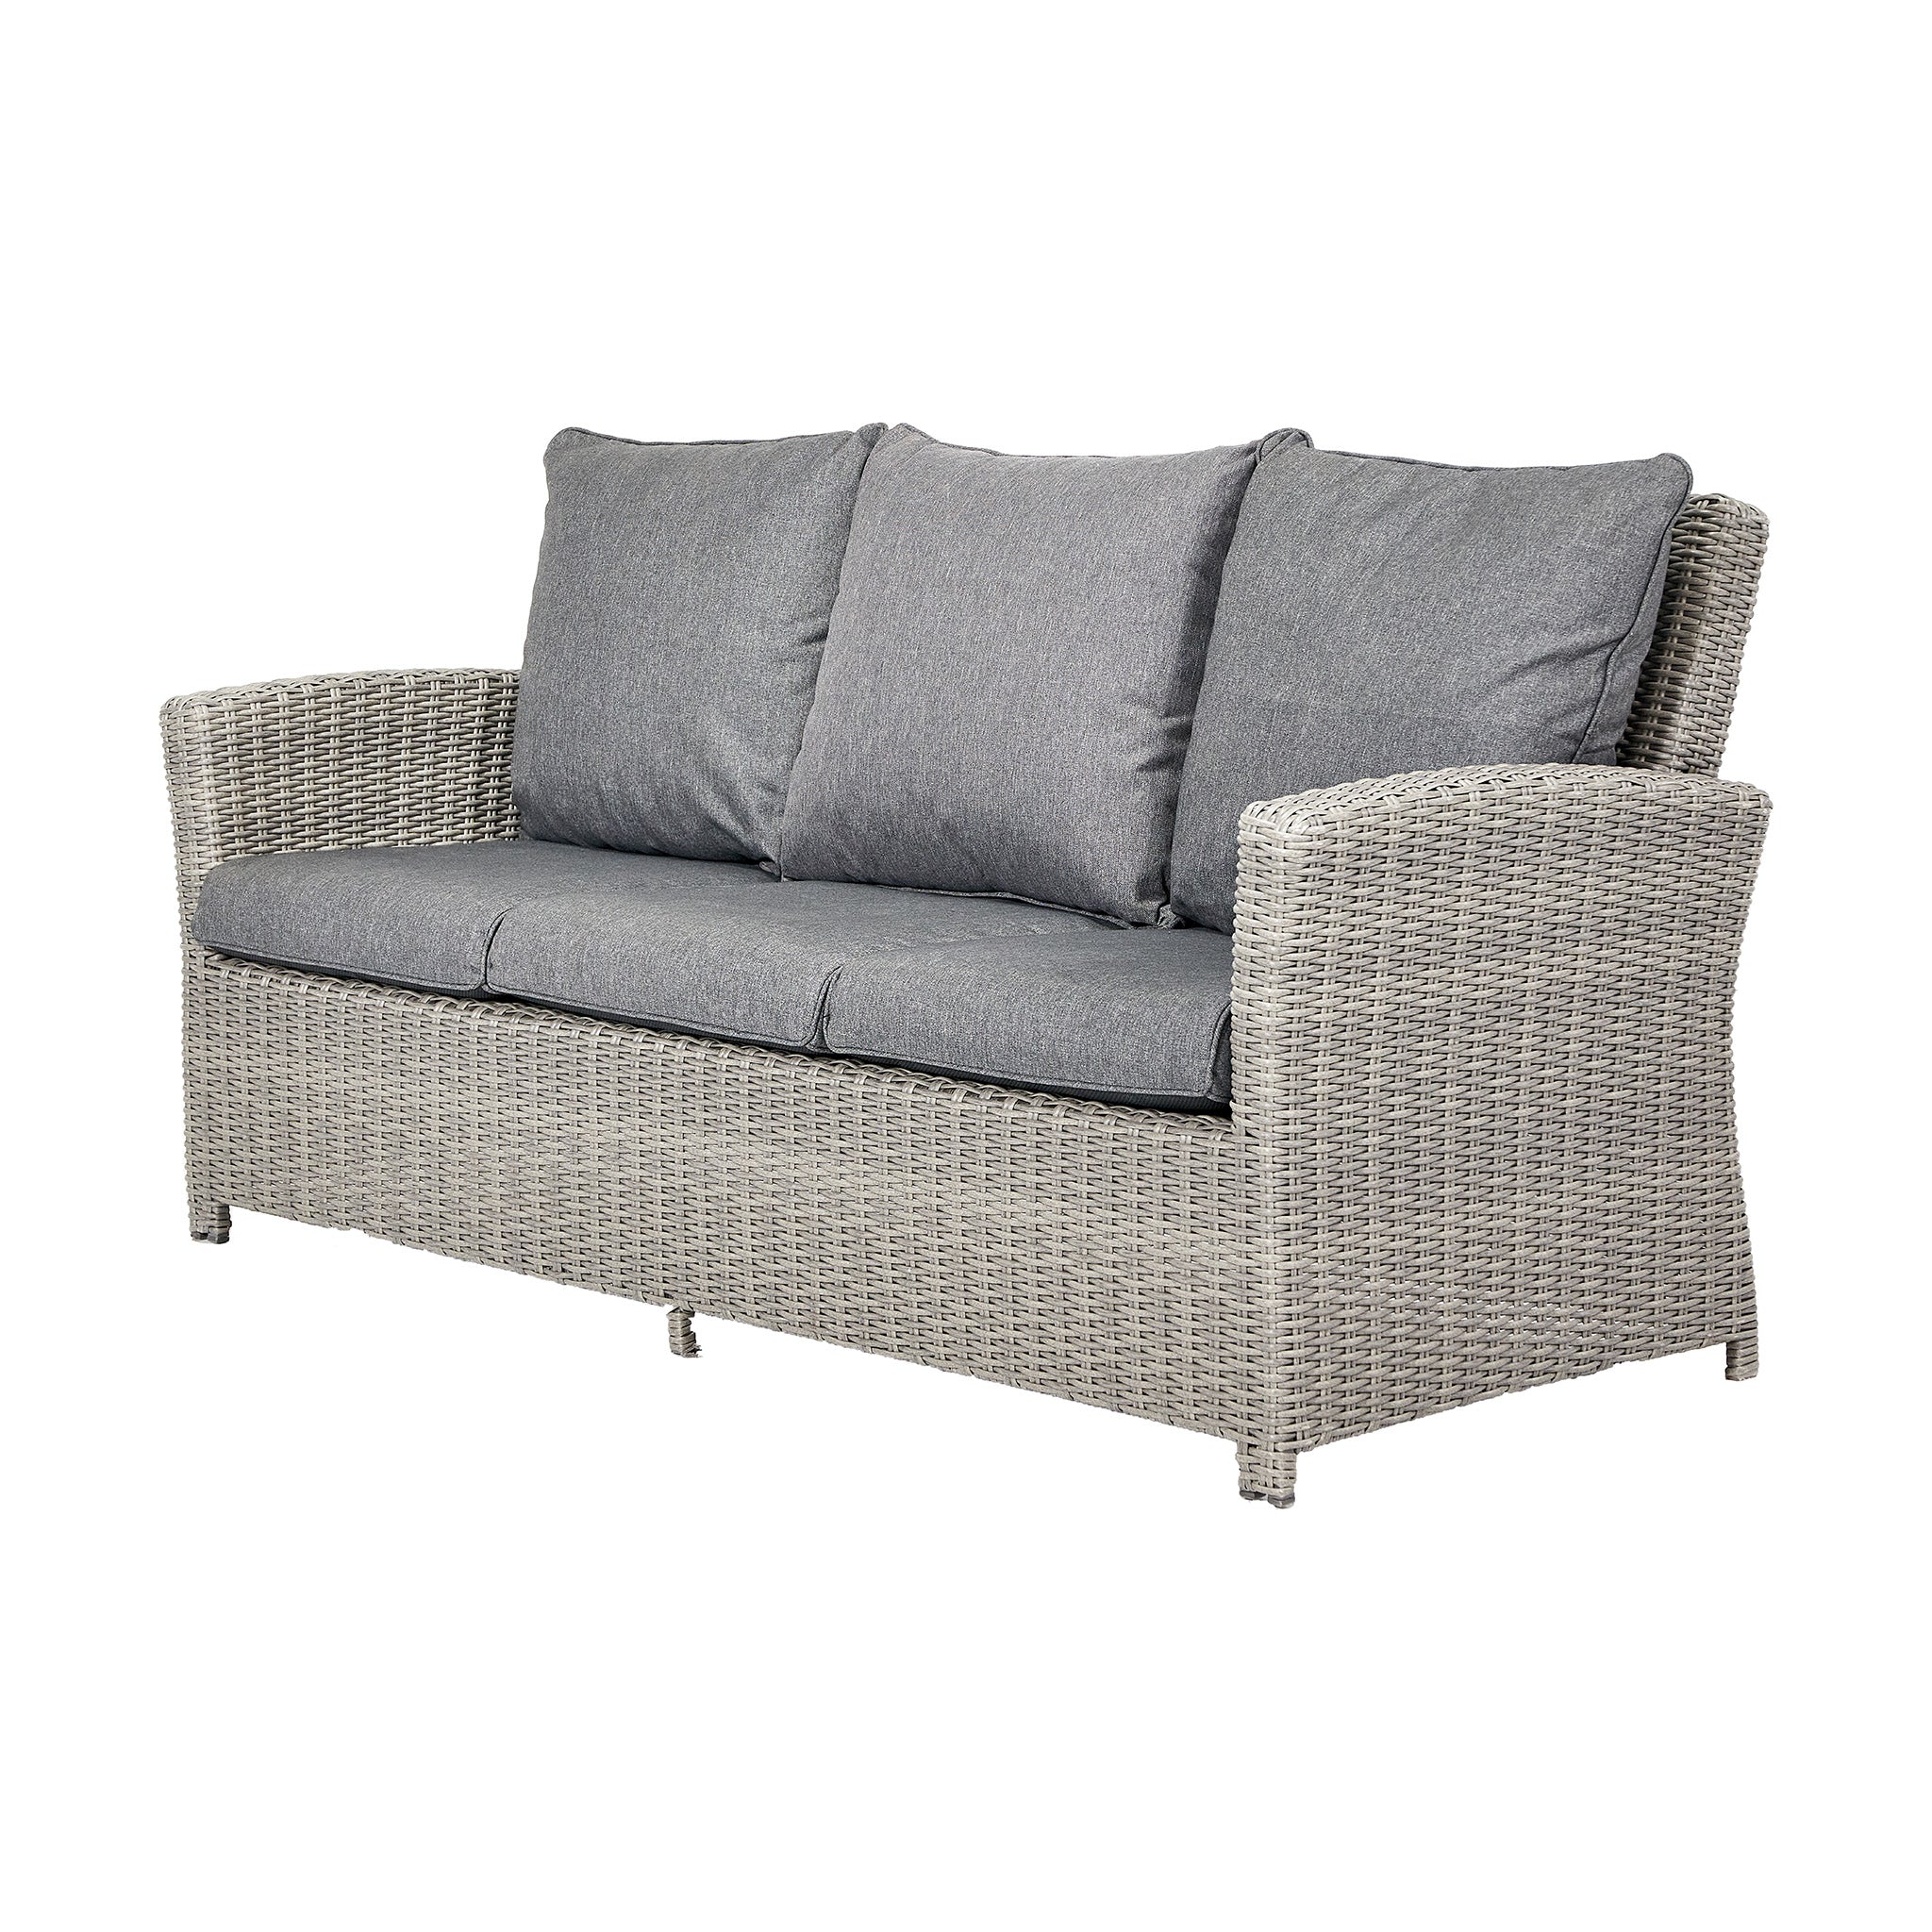 Barbados 3 Seat Rattan Sofa Set with Firepit Table in Slate Grey